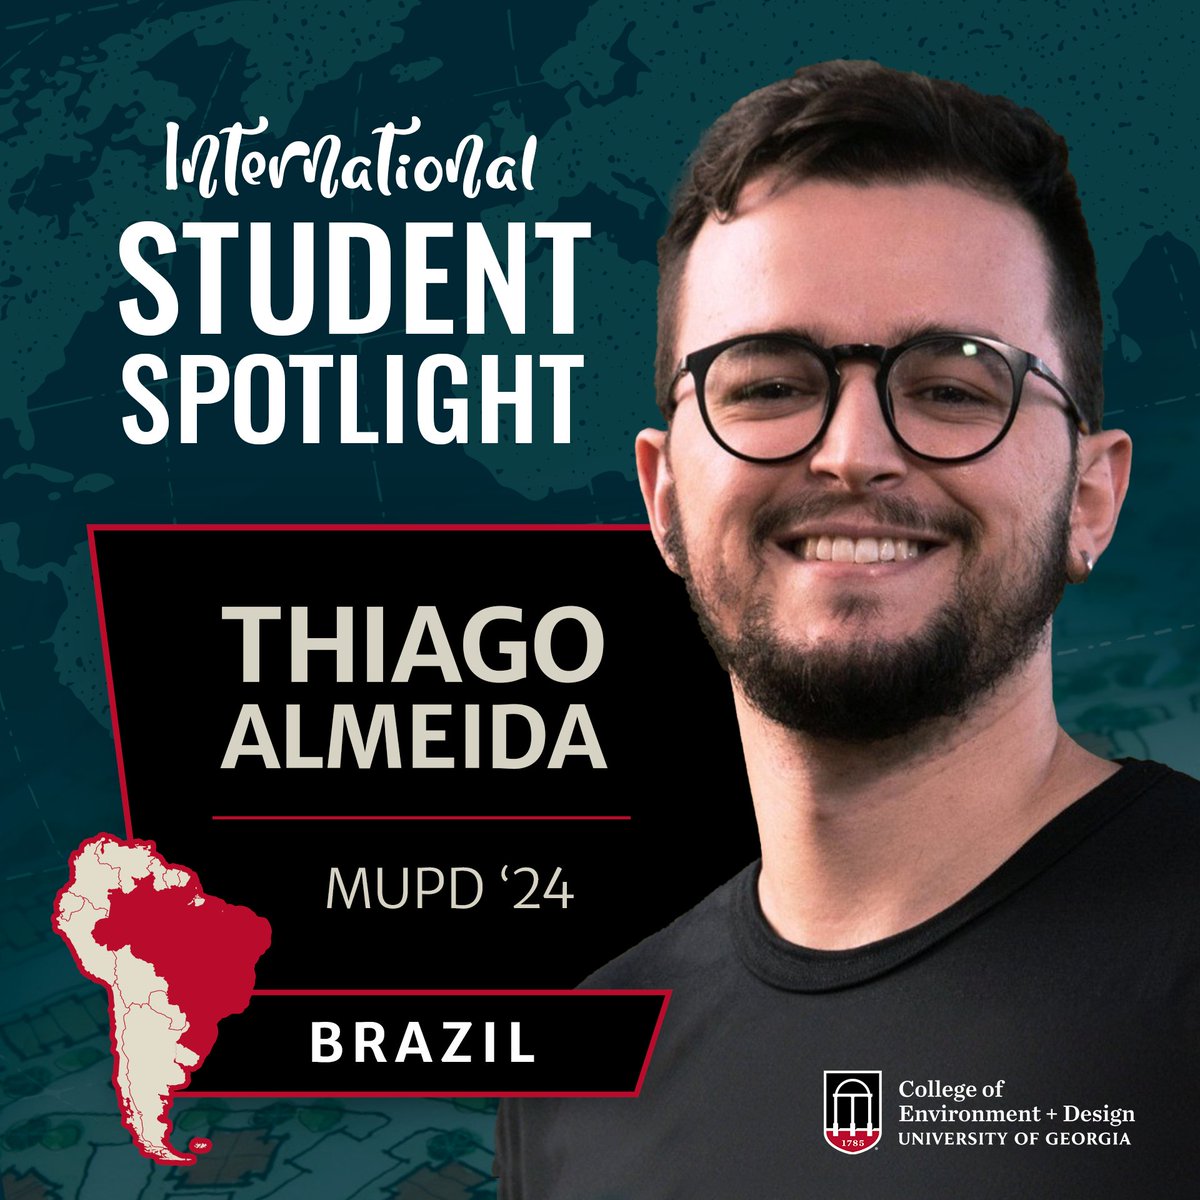 Meet Thiago Almeida, a Master of Urban Planning and Design student, who traveled over 3,000 miles from his home in Brazil for an opportunity to continue his education at the CED! Learn more about Almeida and his urban planning journey via the newsfeed link in our bio.